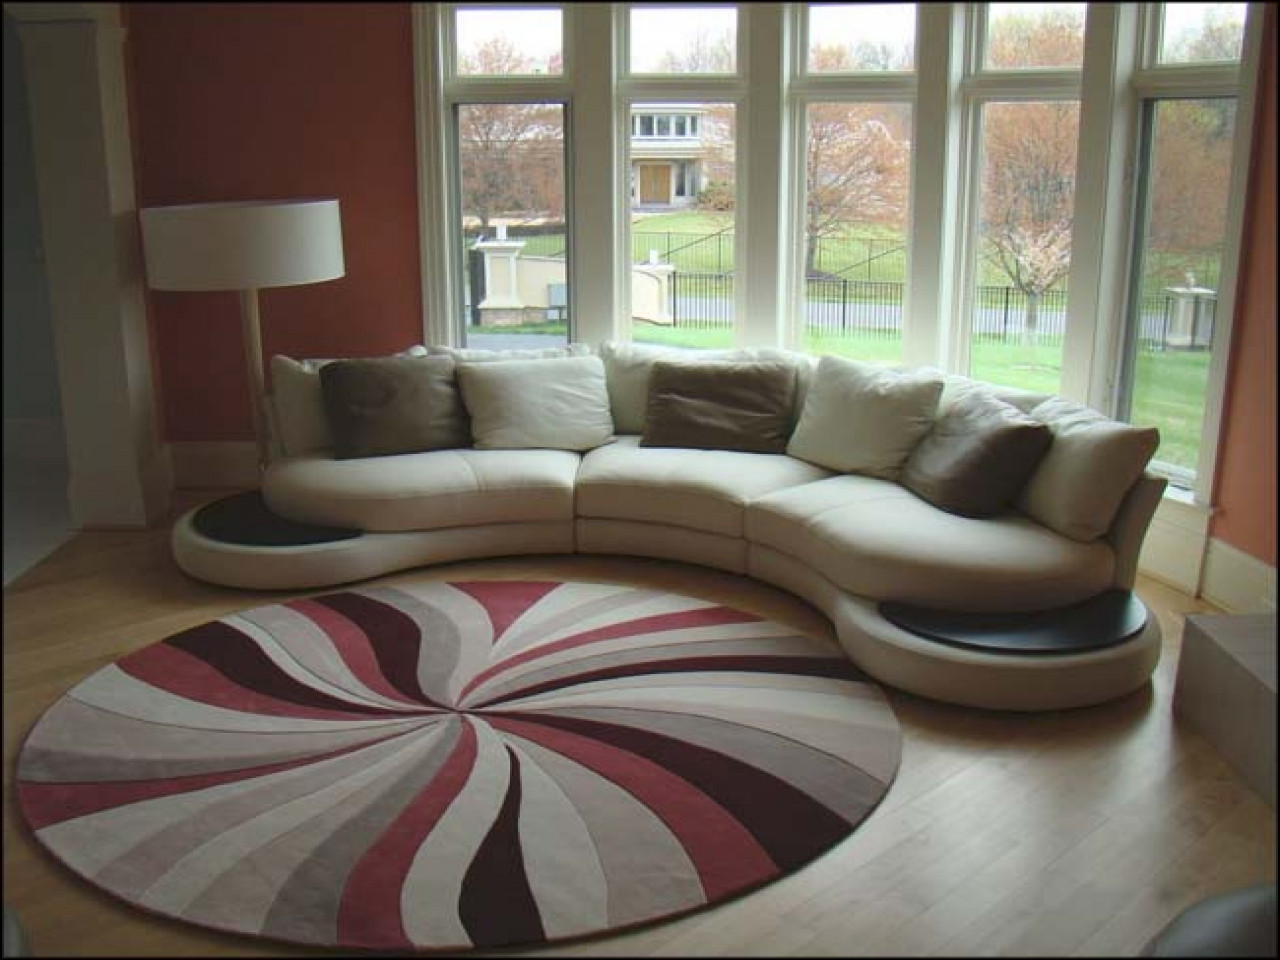 Living Room Floor Rugs
 Rugs for Cozy Living Room Area Rugs Ideas